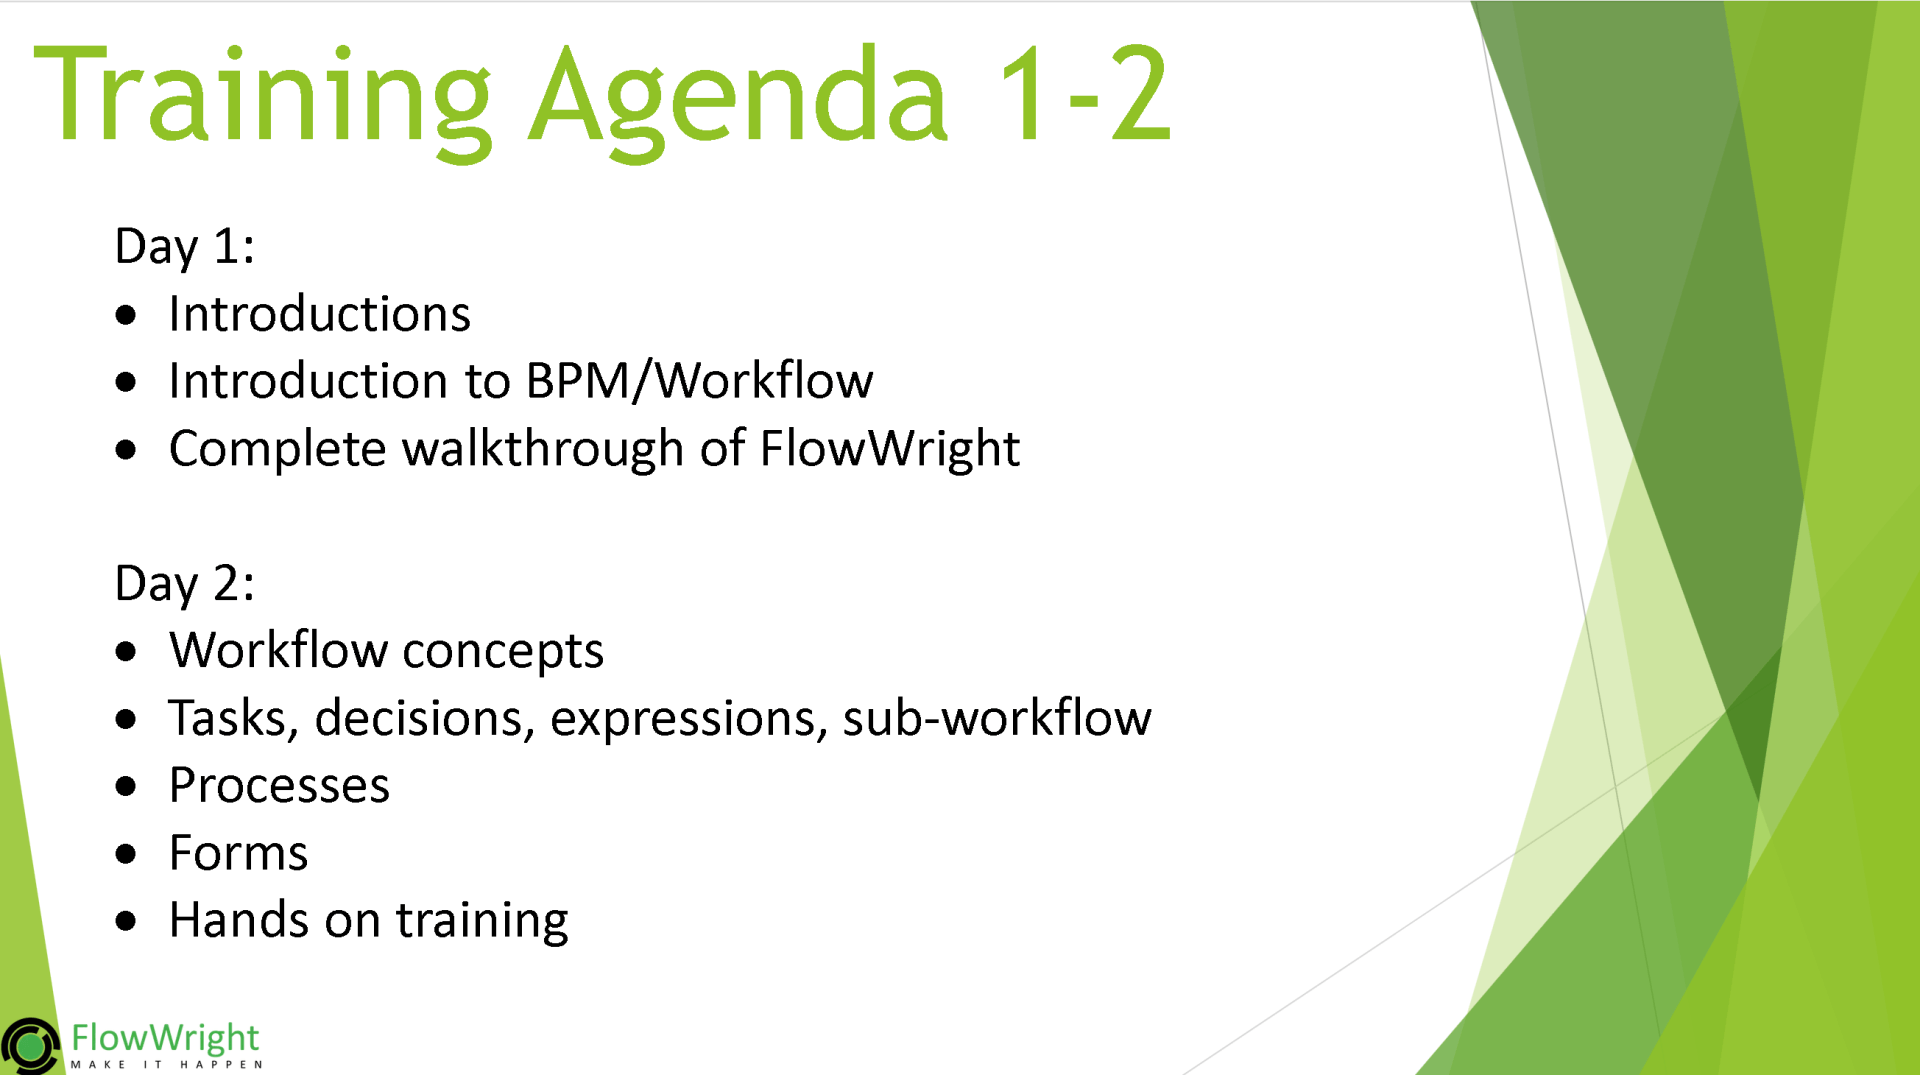 A training agenda for day 1 and day 2